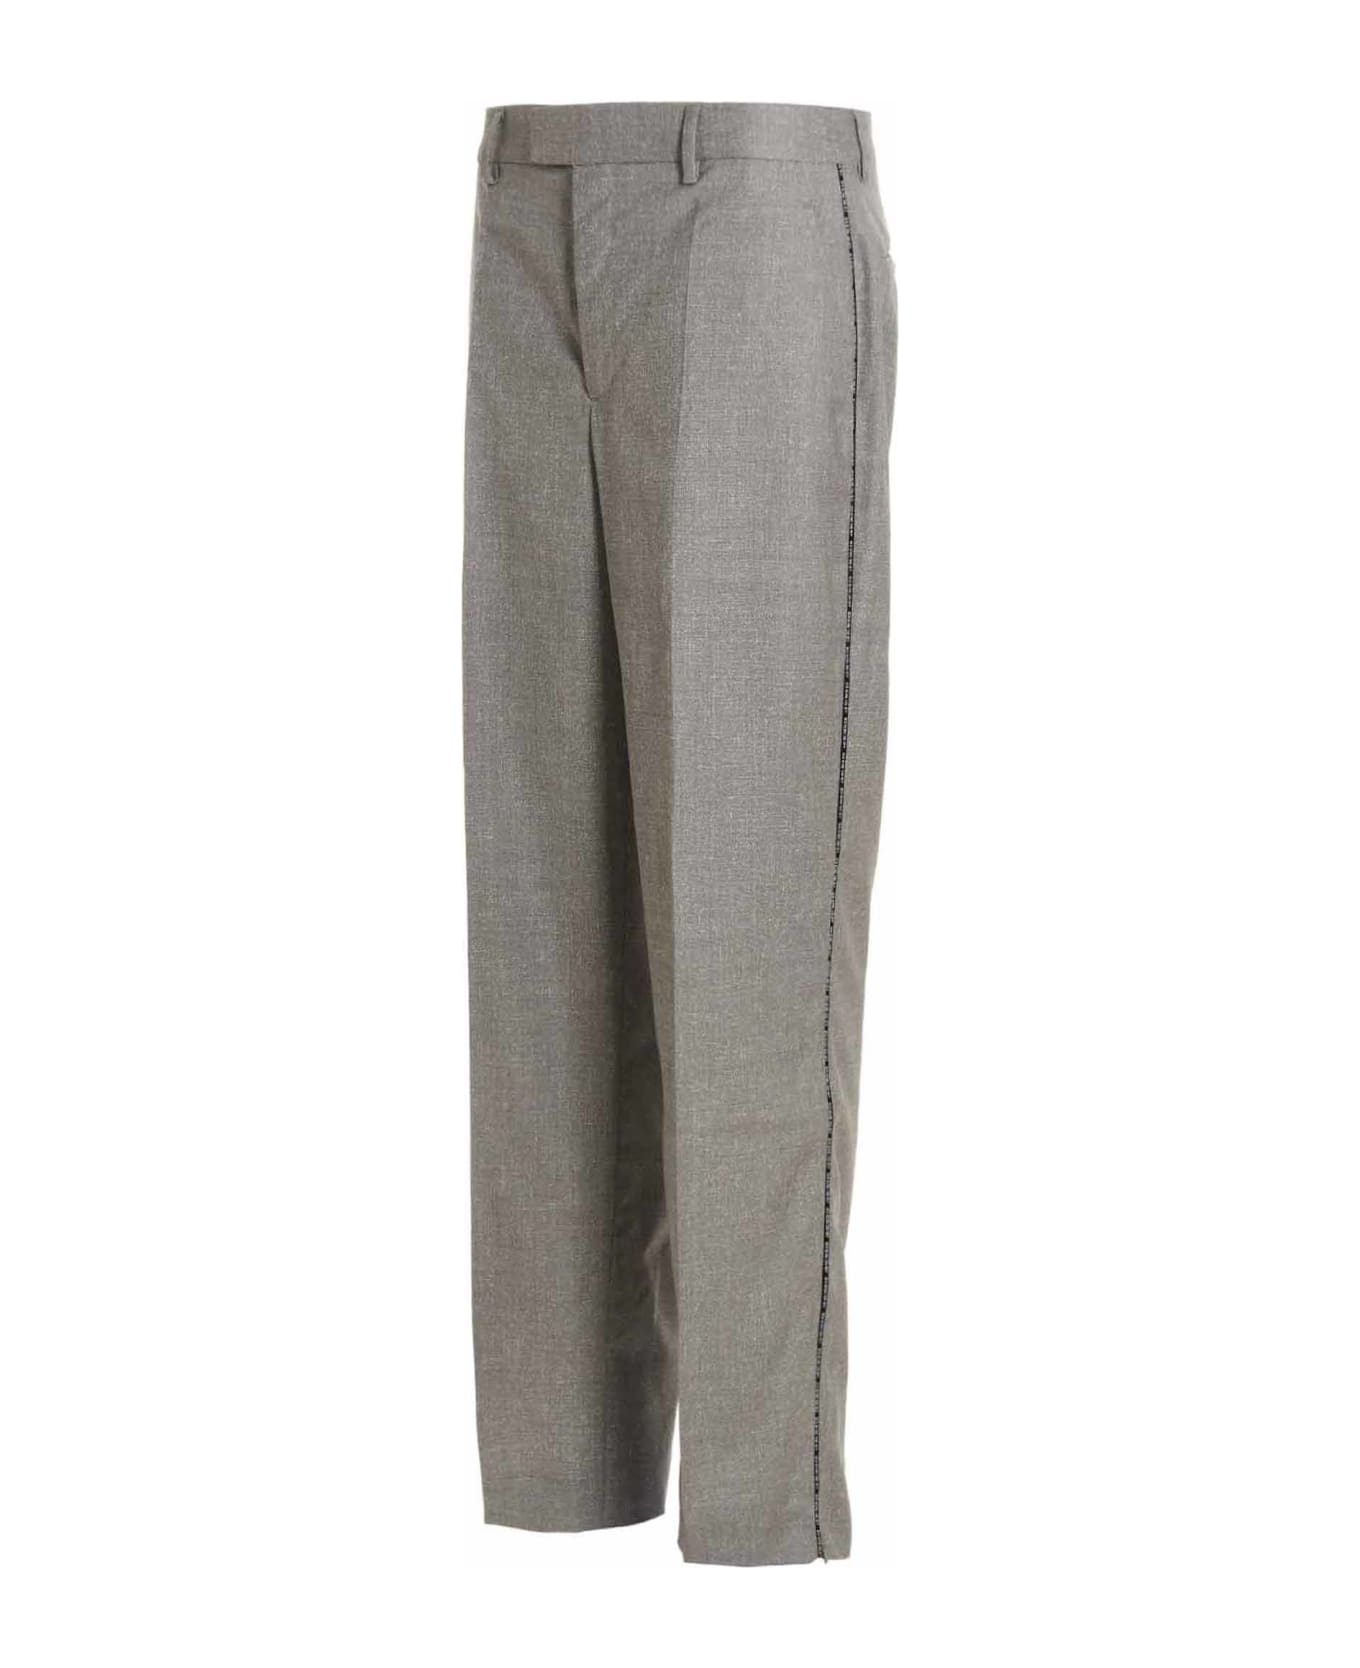 VTMNTS Numbered Tailored' Pants - Gray